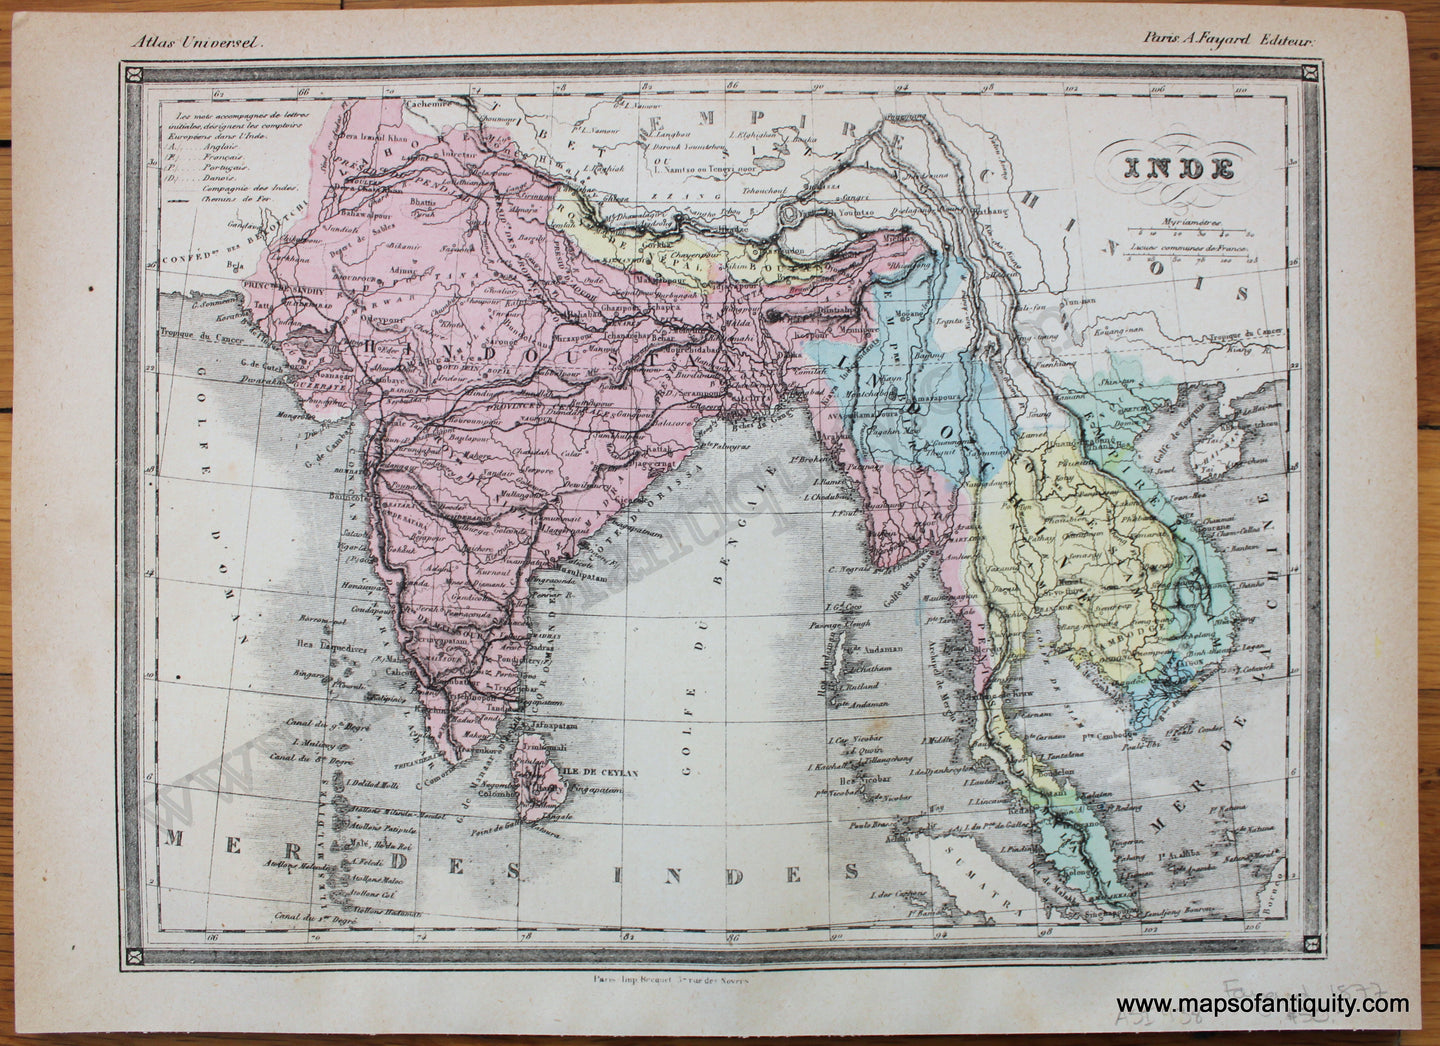 Antique-Printed-Color-Map-Inde---India-and-Southeast-Asia-1877-Fayard-Indian-Subcontinent--1800s-19th-century-Maps-of-Antiquity